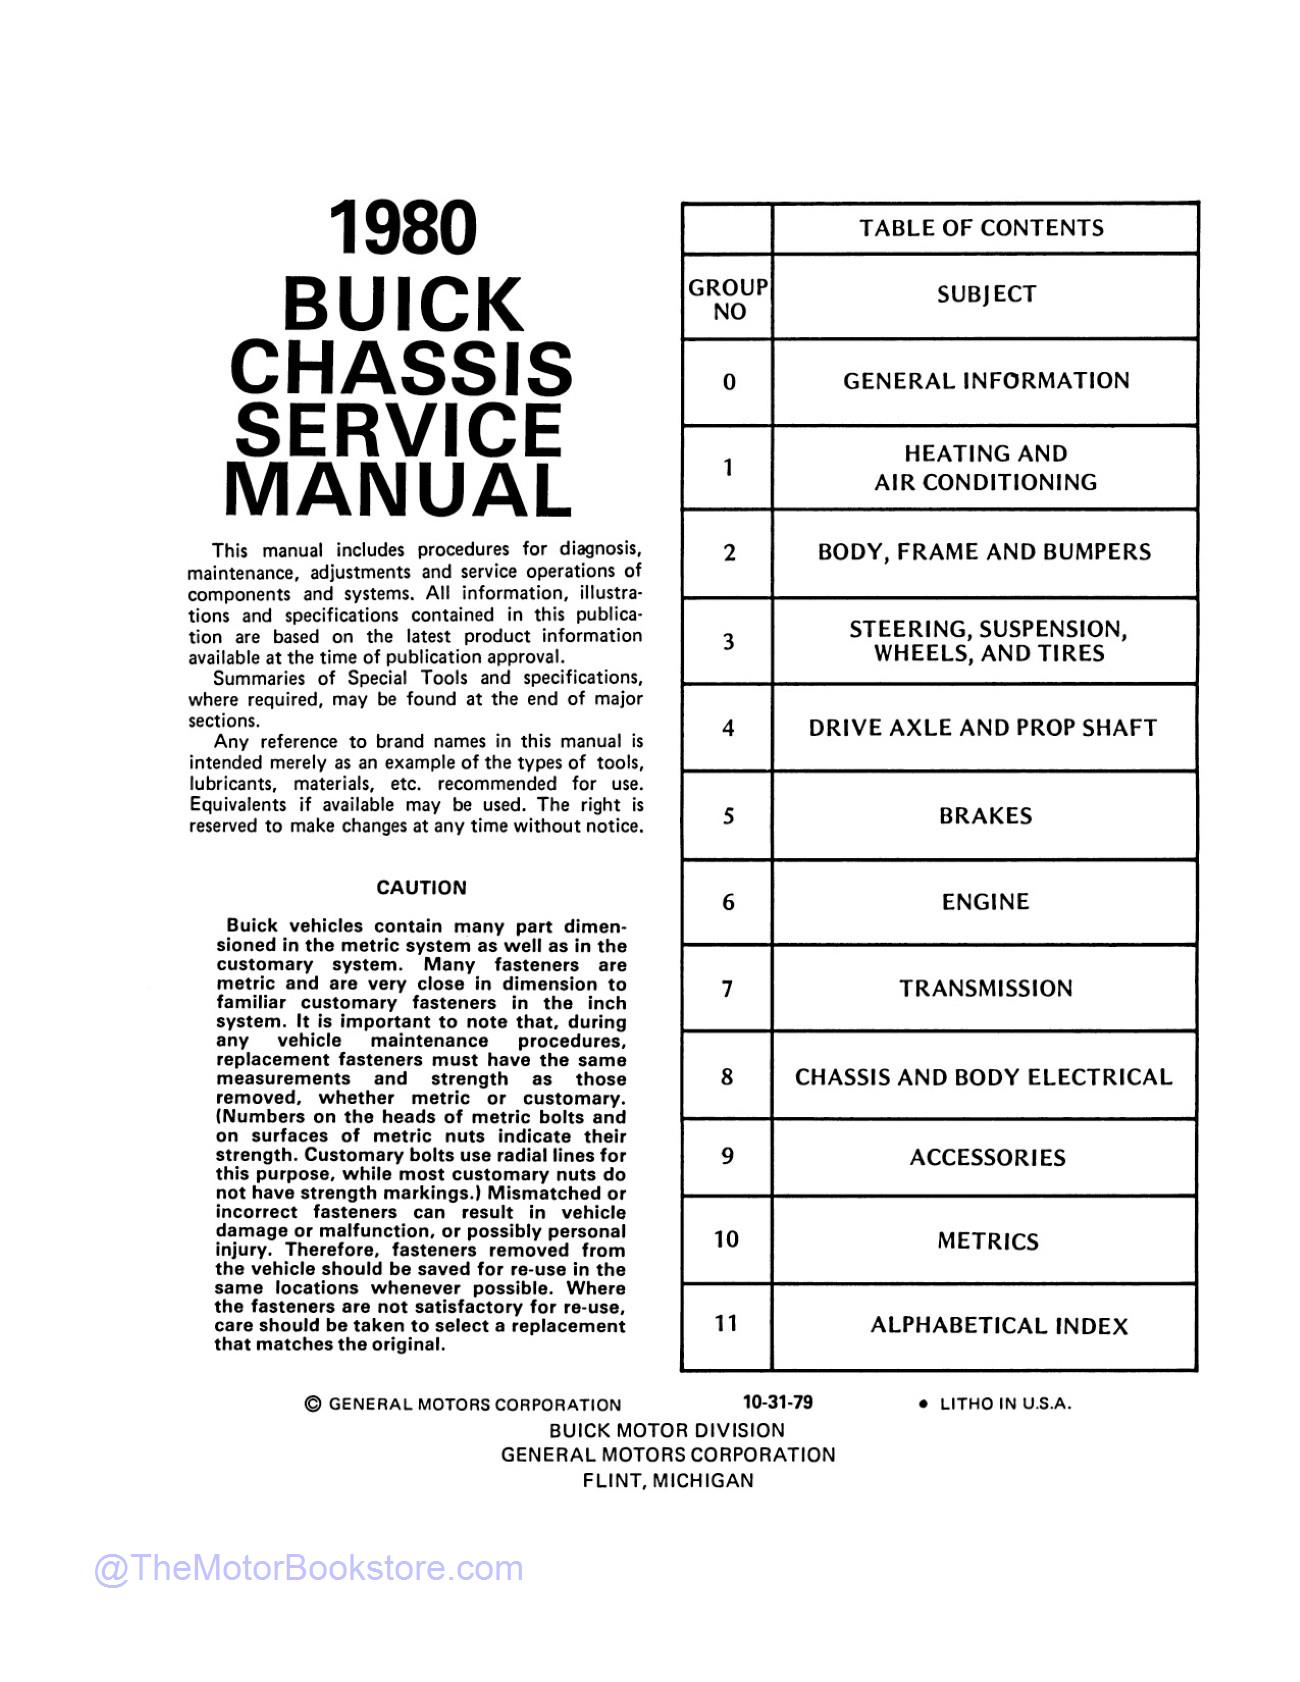 1980 Buick Chassis Service Manual  - Table of Contents